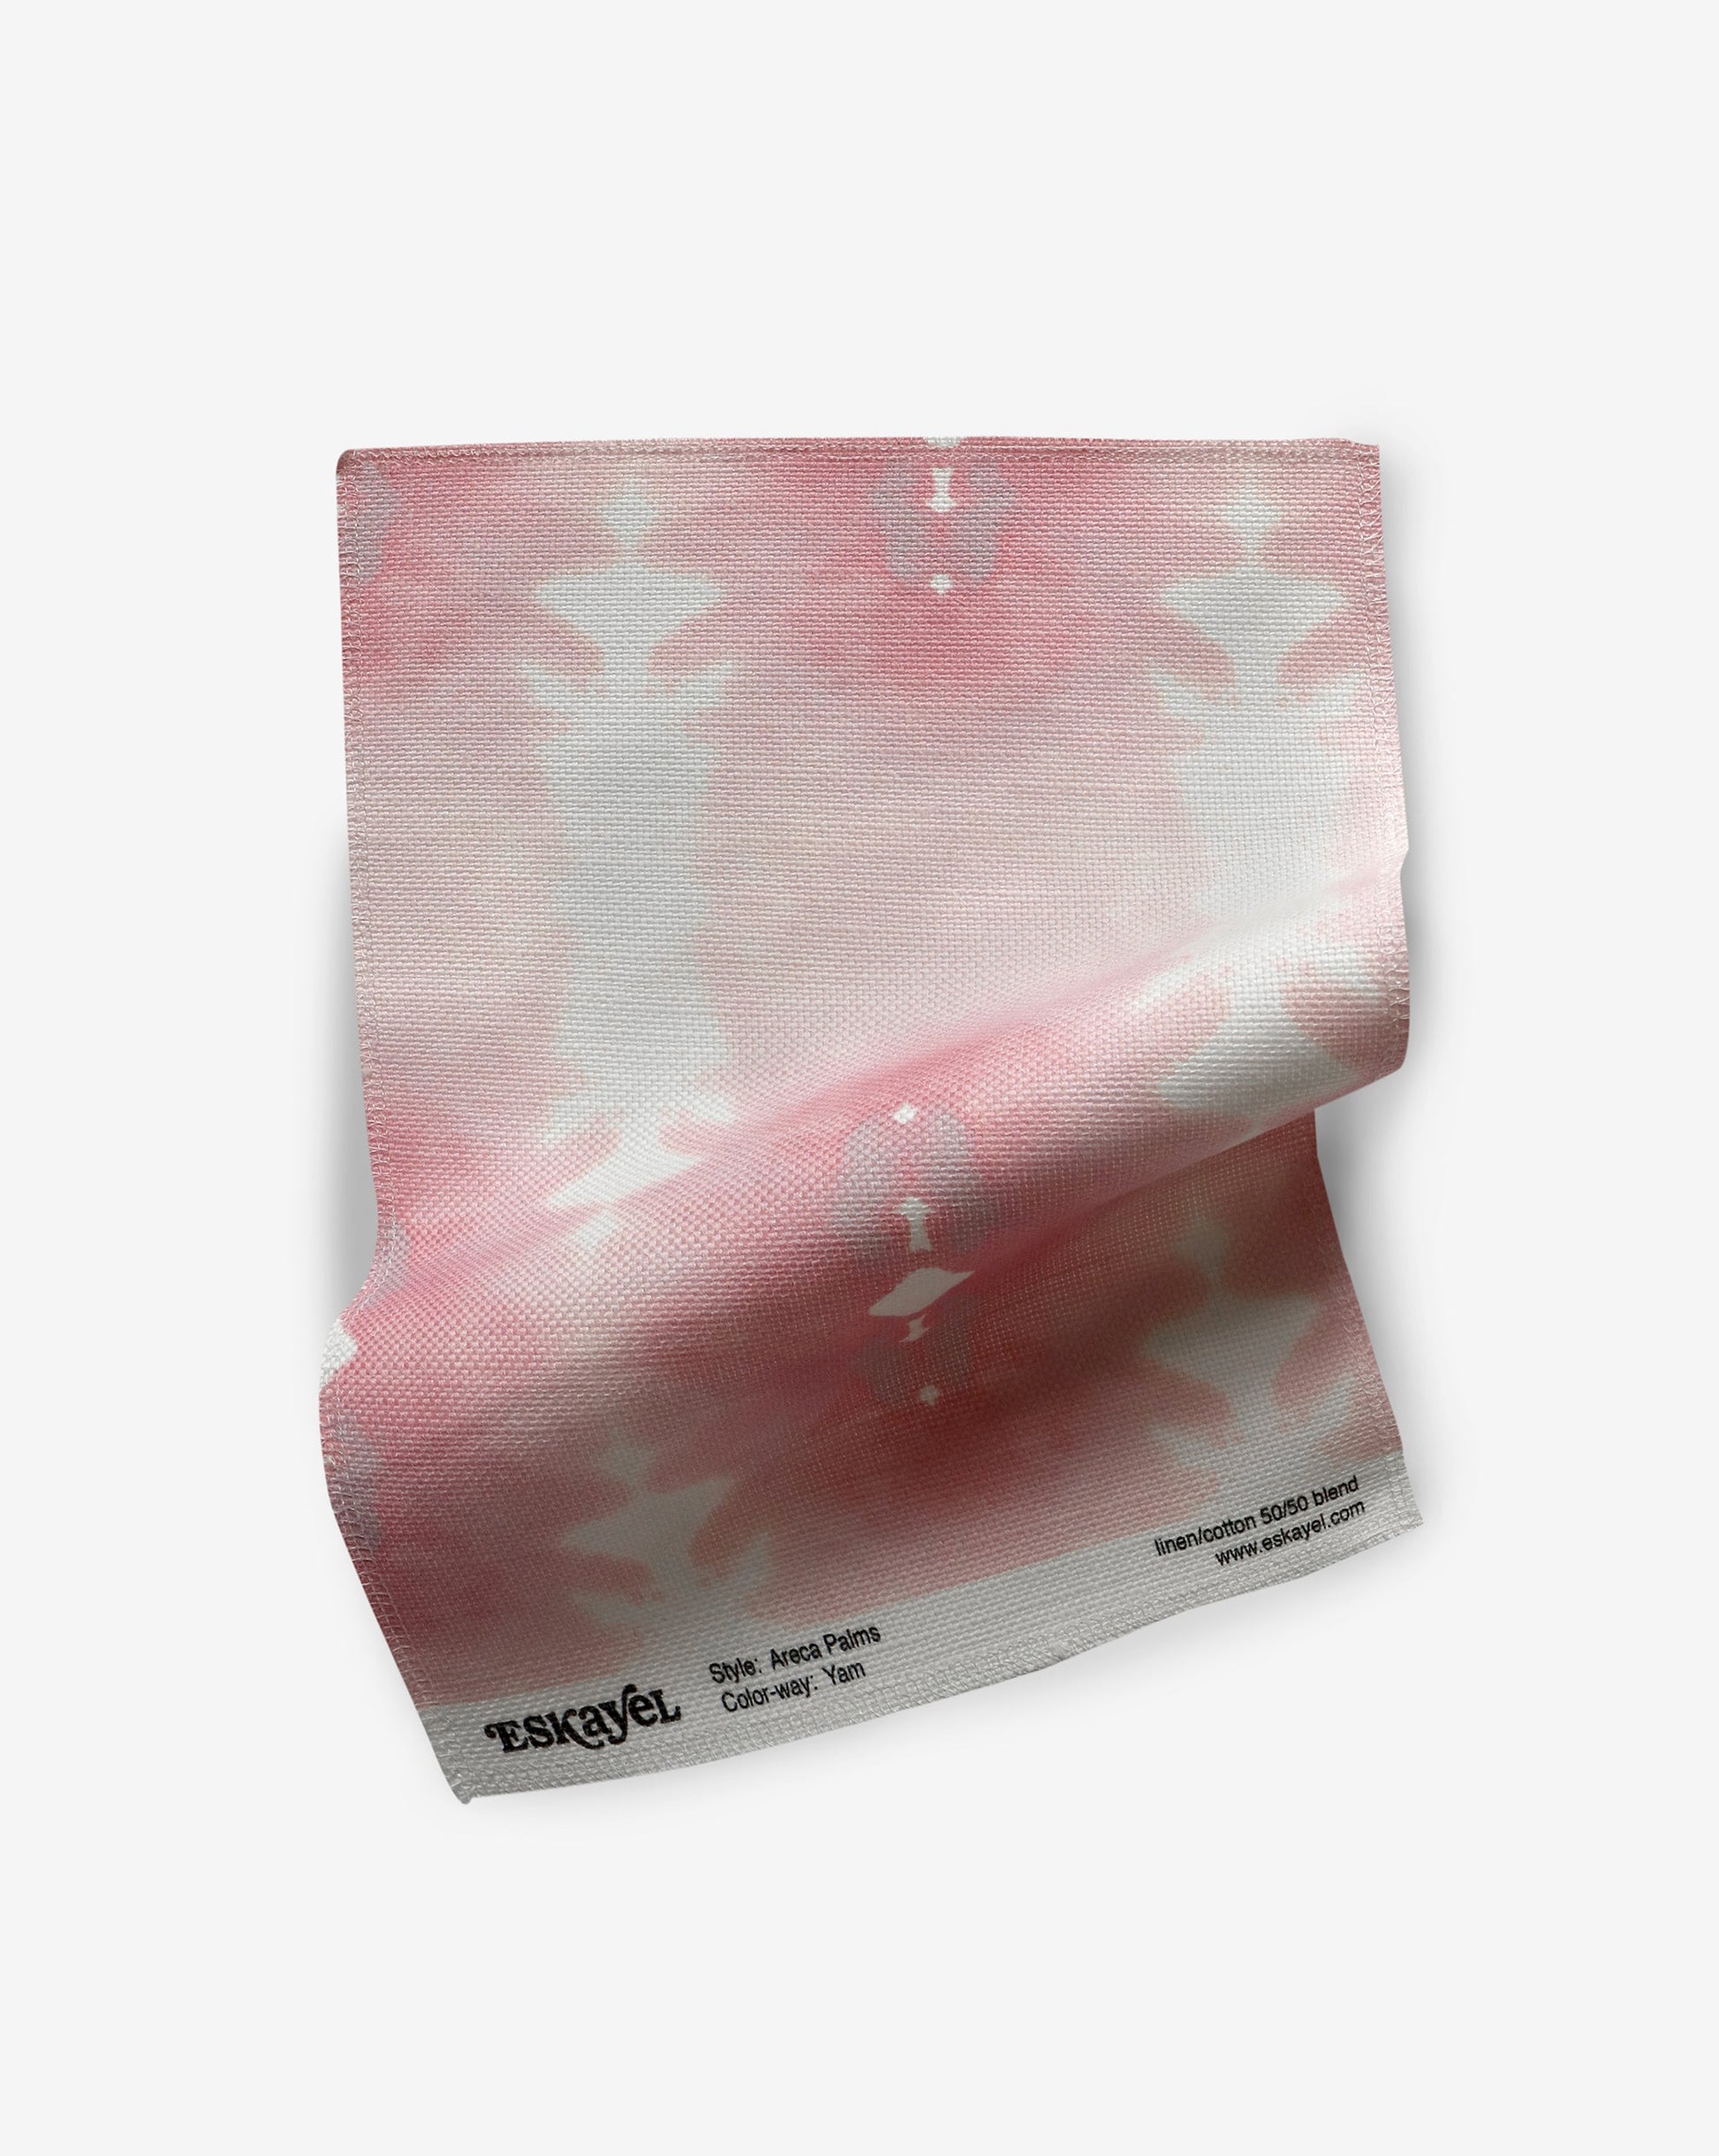 A pink and white tie dye pattern inspired by the oceanic art of the Kwoma people on a piece of Areca Palms Fabric Yam